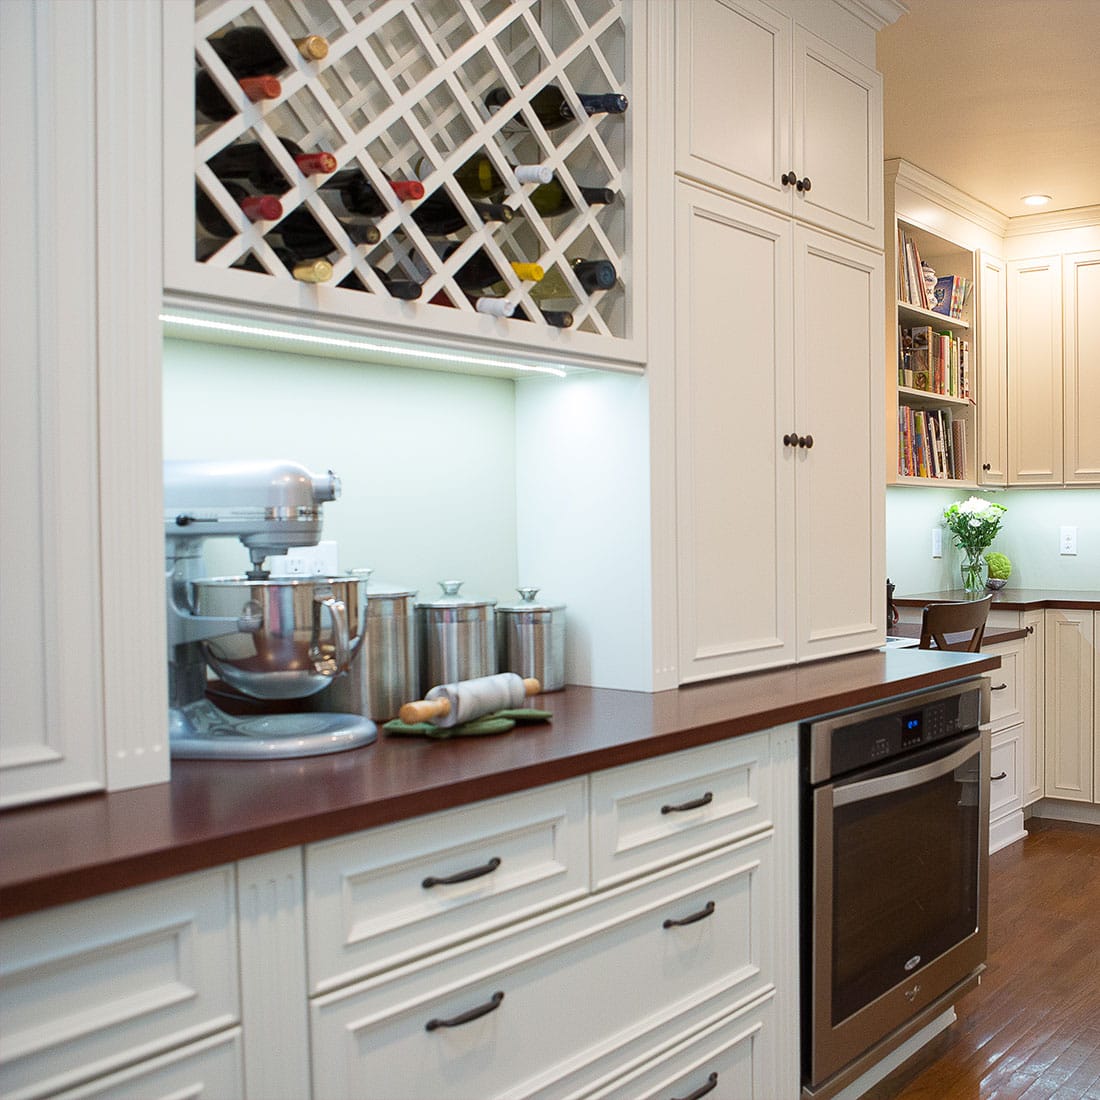 Built in storage nook with wine rack in renovated kitchen